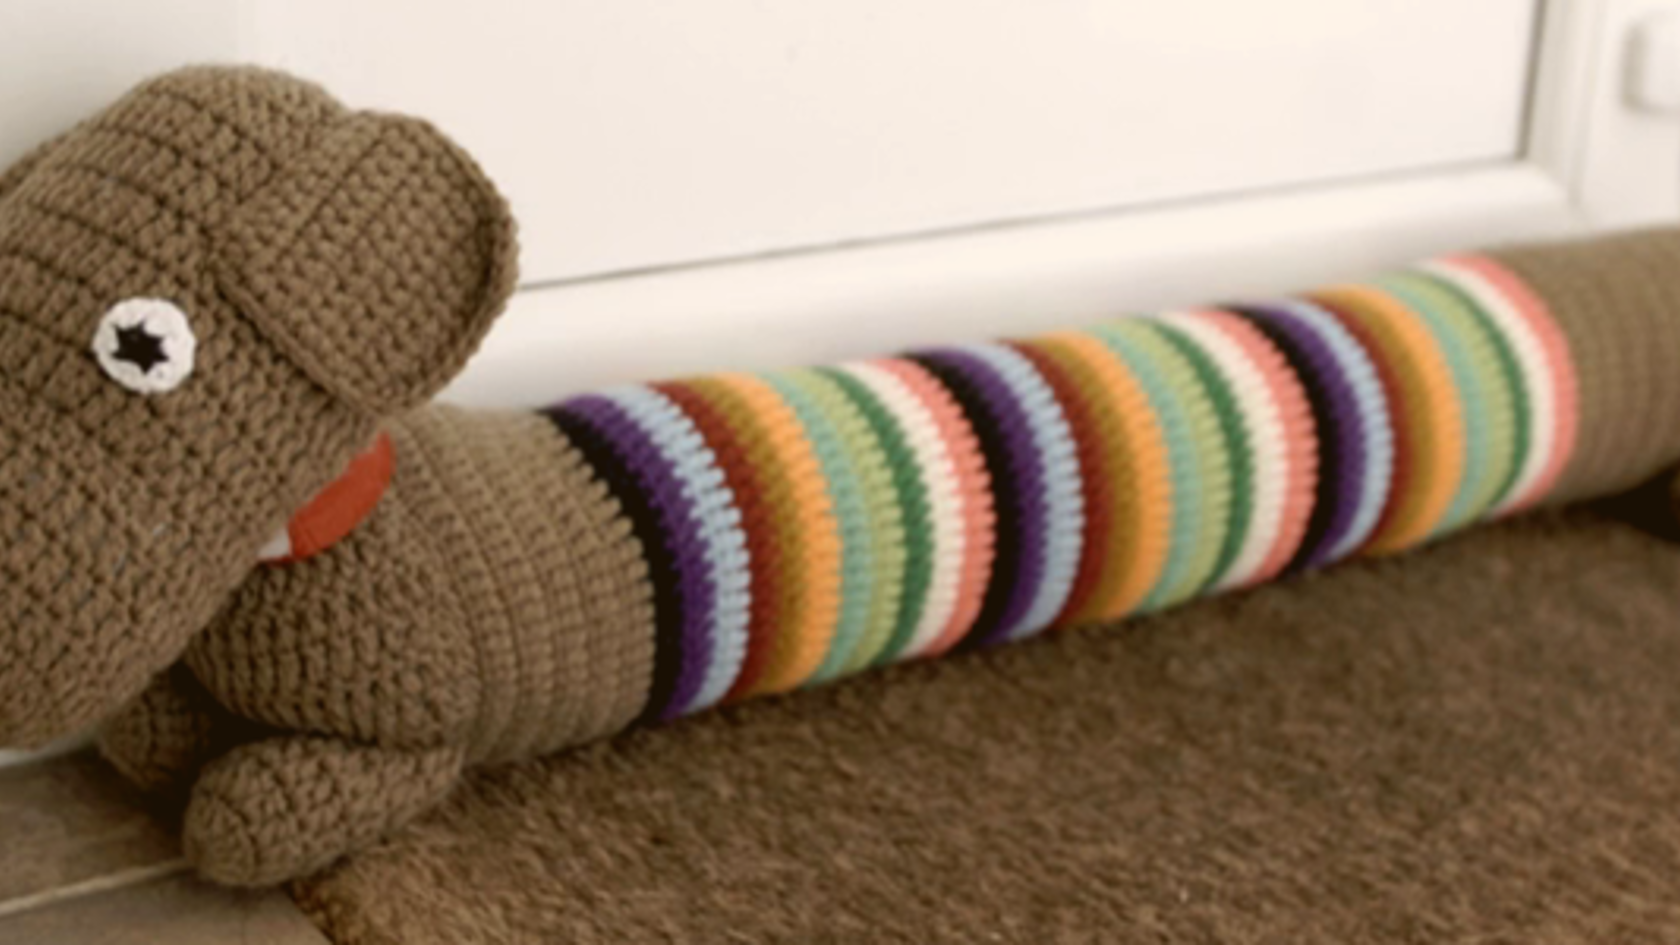 A draft excluder in the shape of a sausage dog